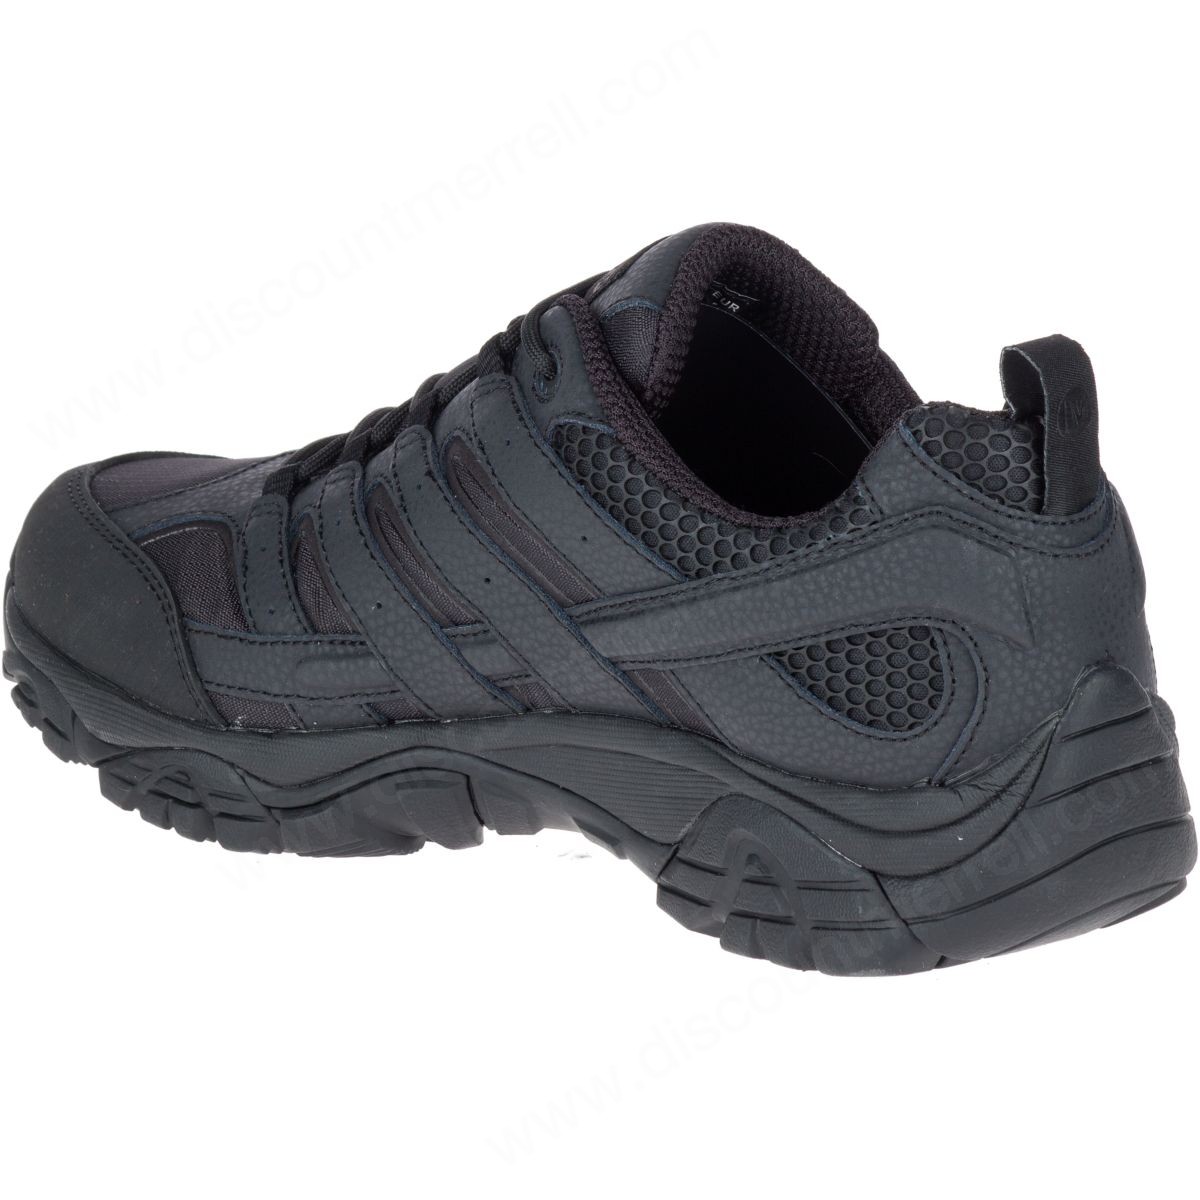 Merrell Man's Moab Tactical Shoes Wide Black - -6